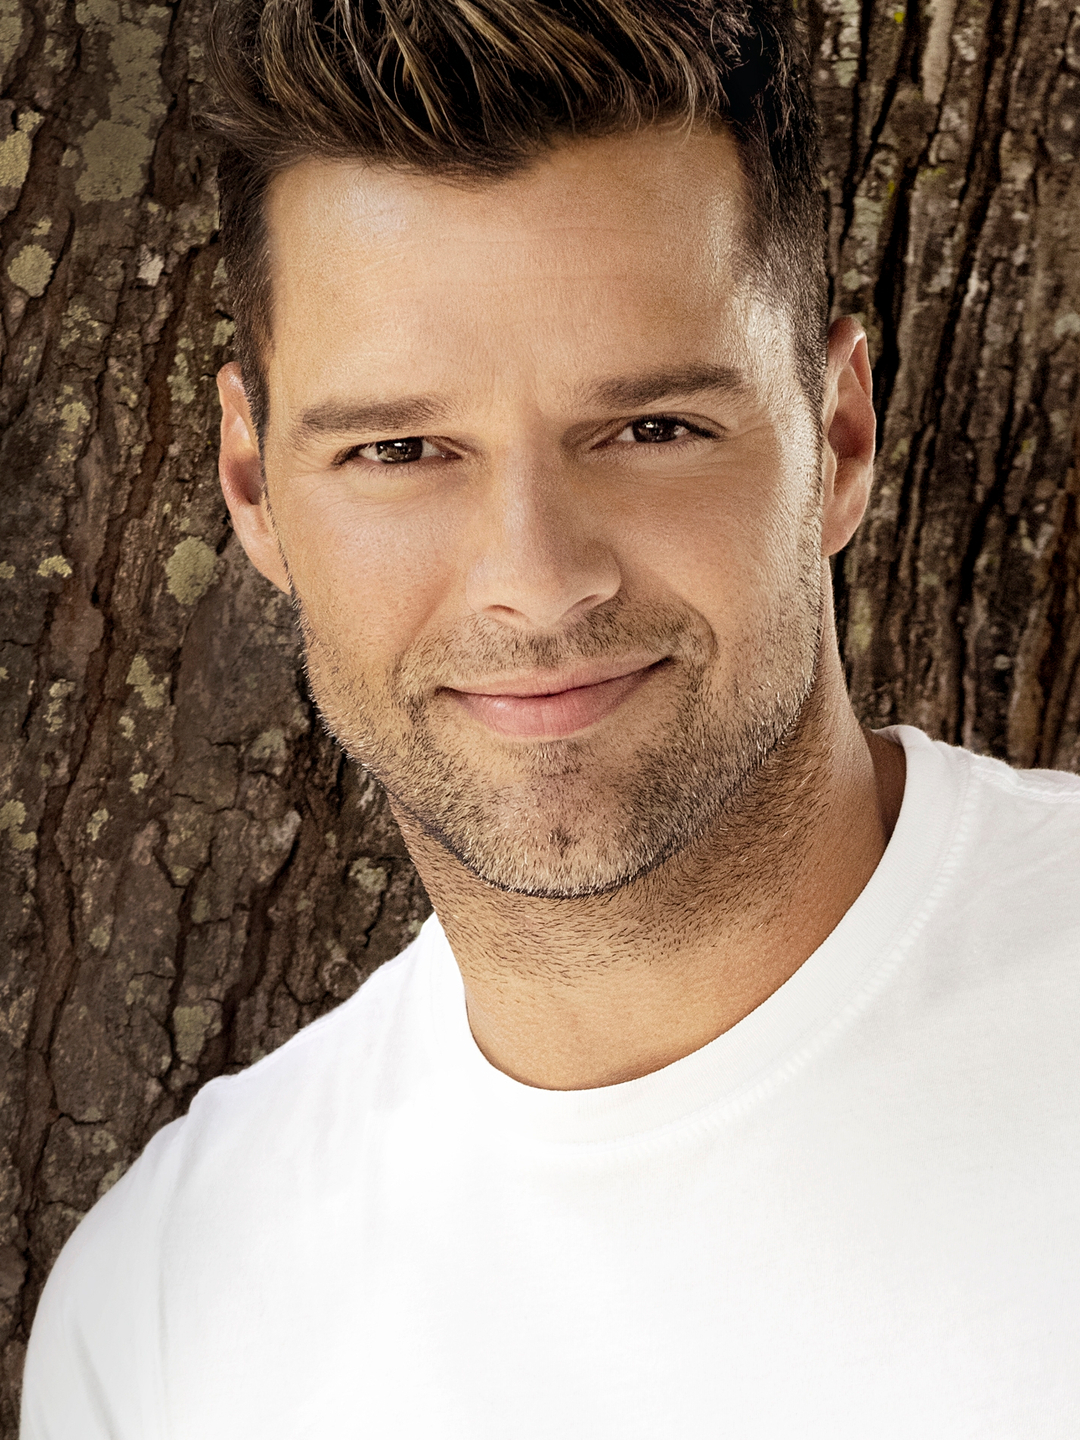 Ricky Martin does he have a wife